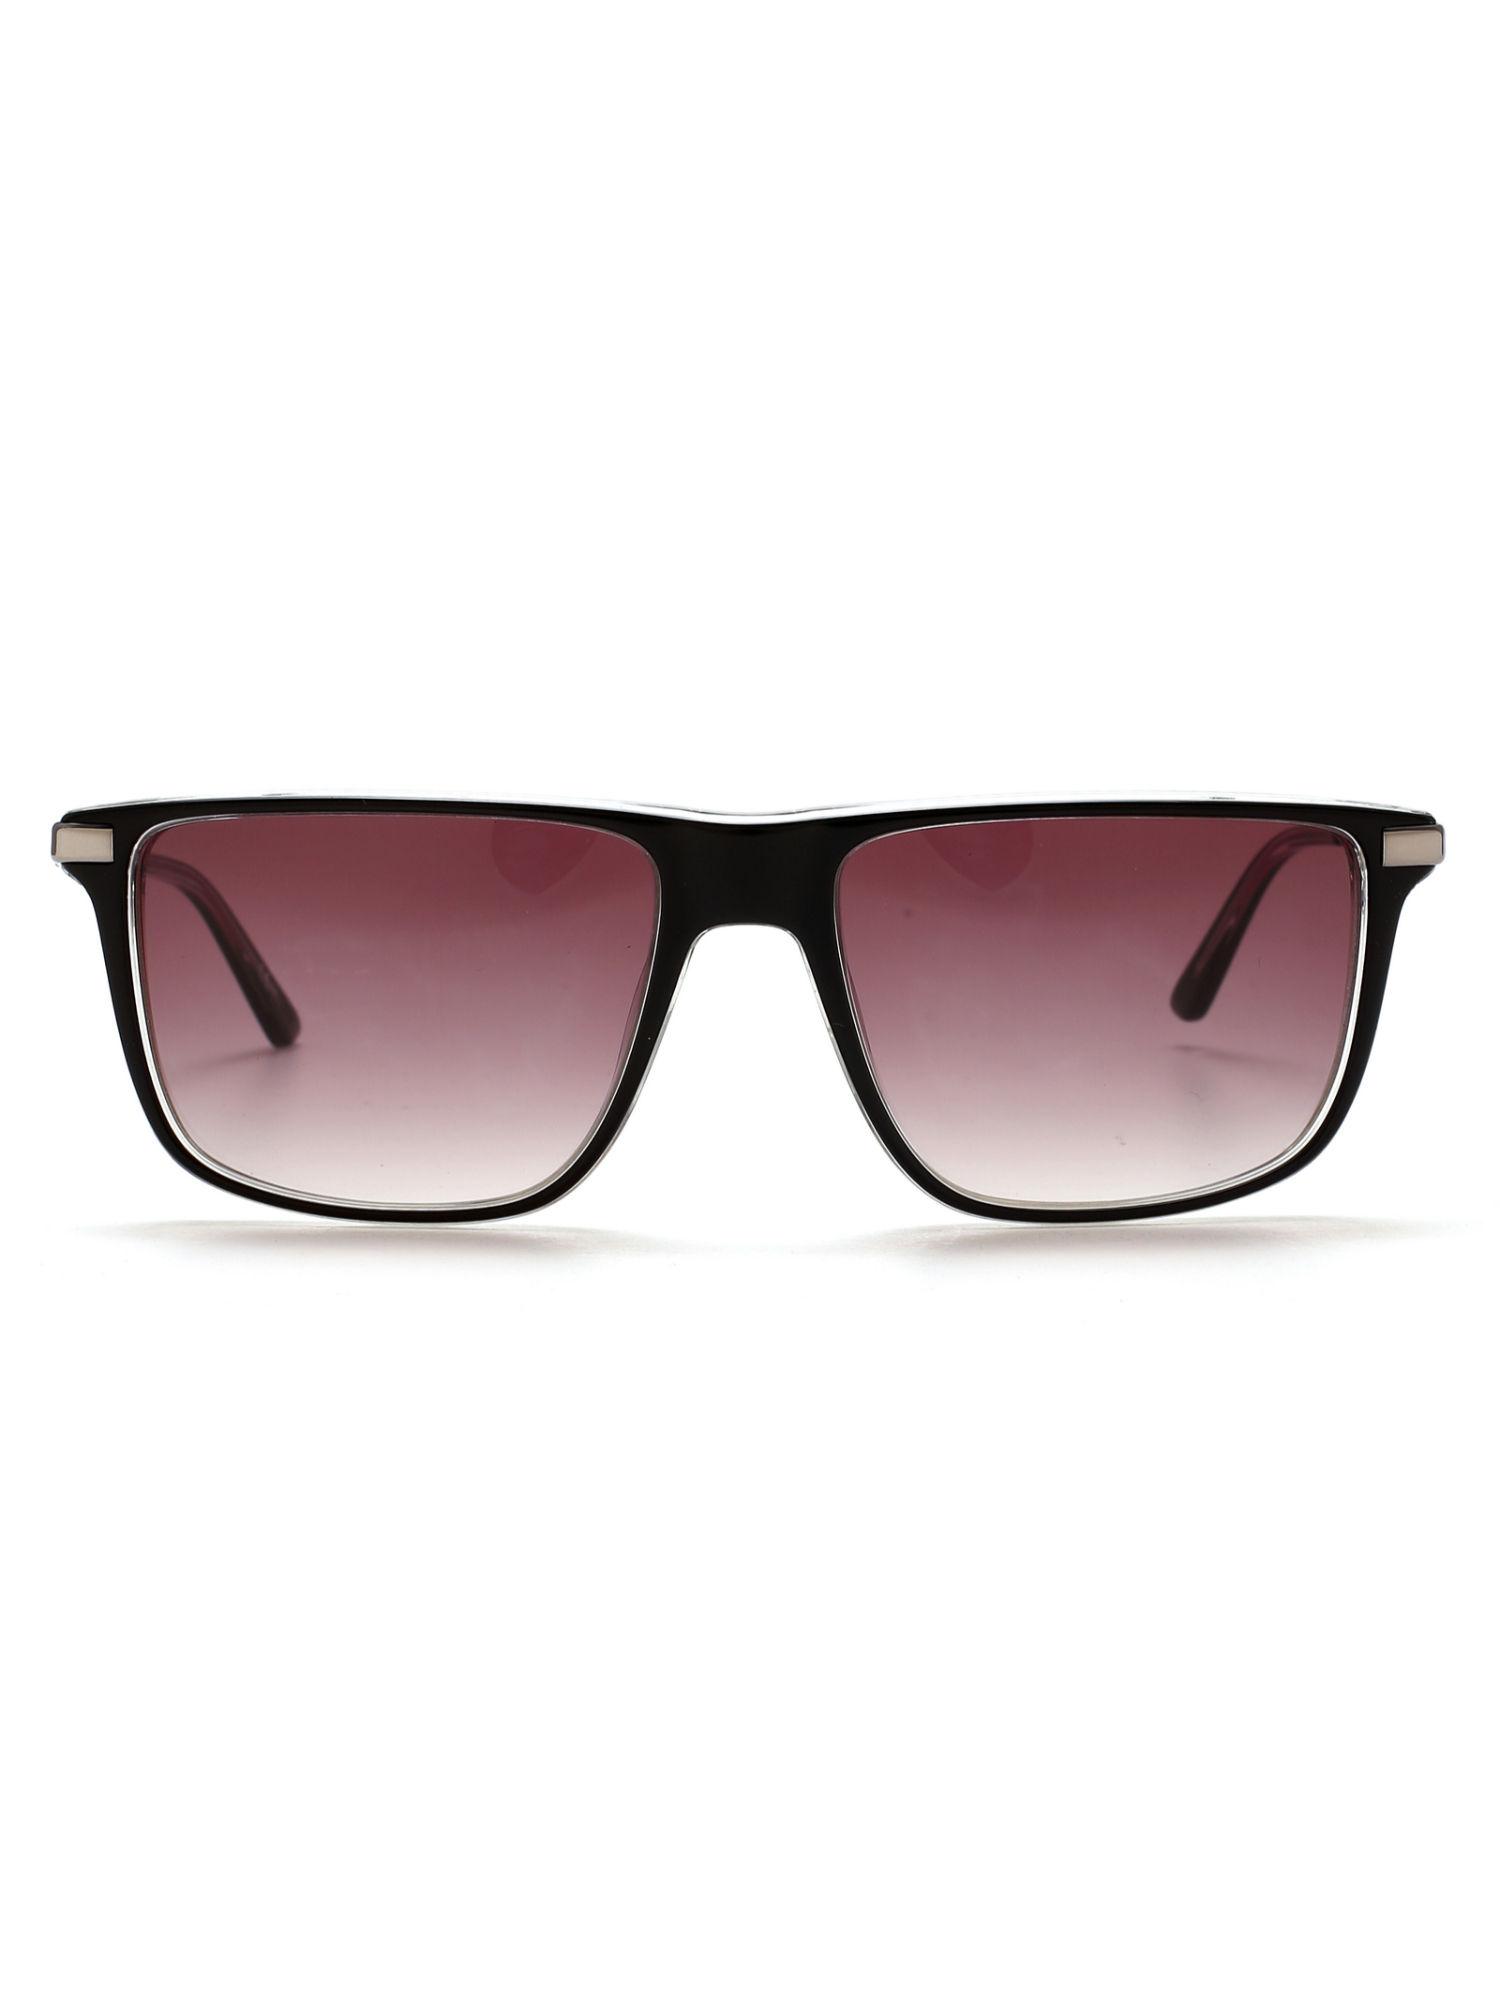 modified rectangle sunglasses with maroon lens for men